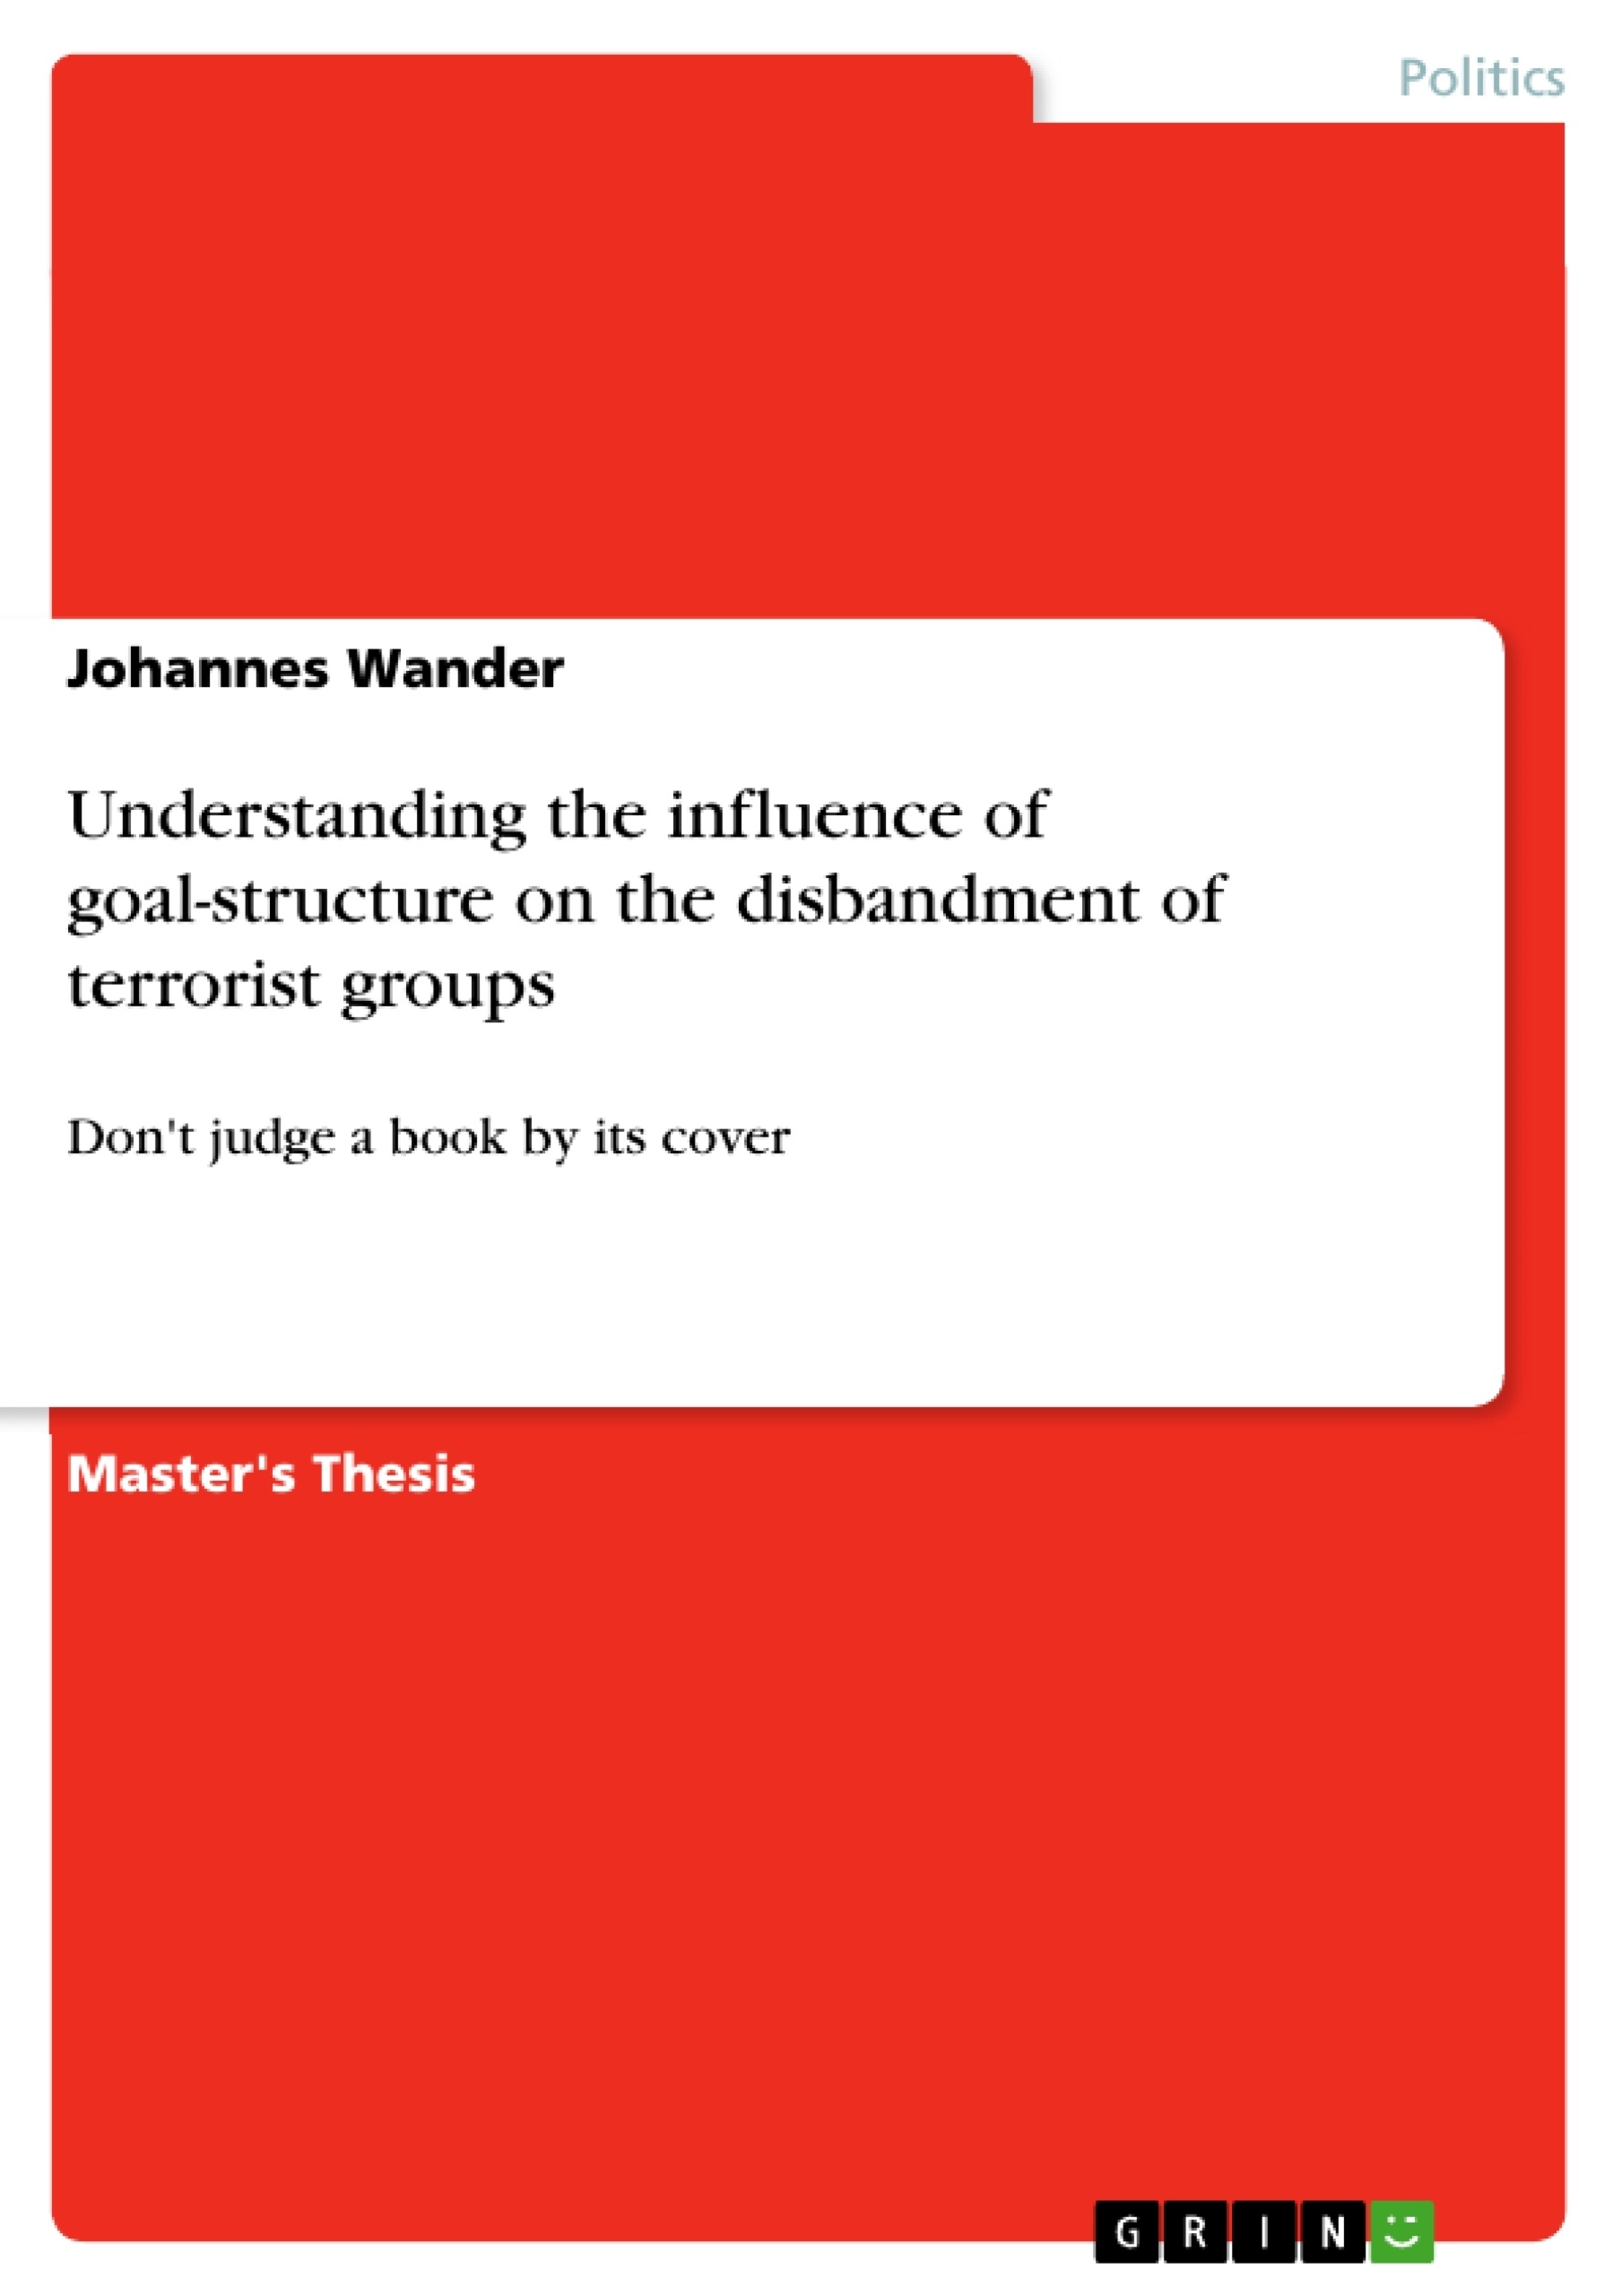 Title: Understanding the influence of goal-structure on the disbandment of terrorist groups